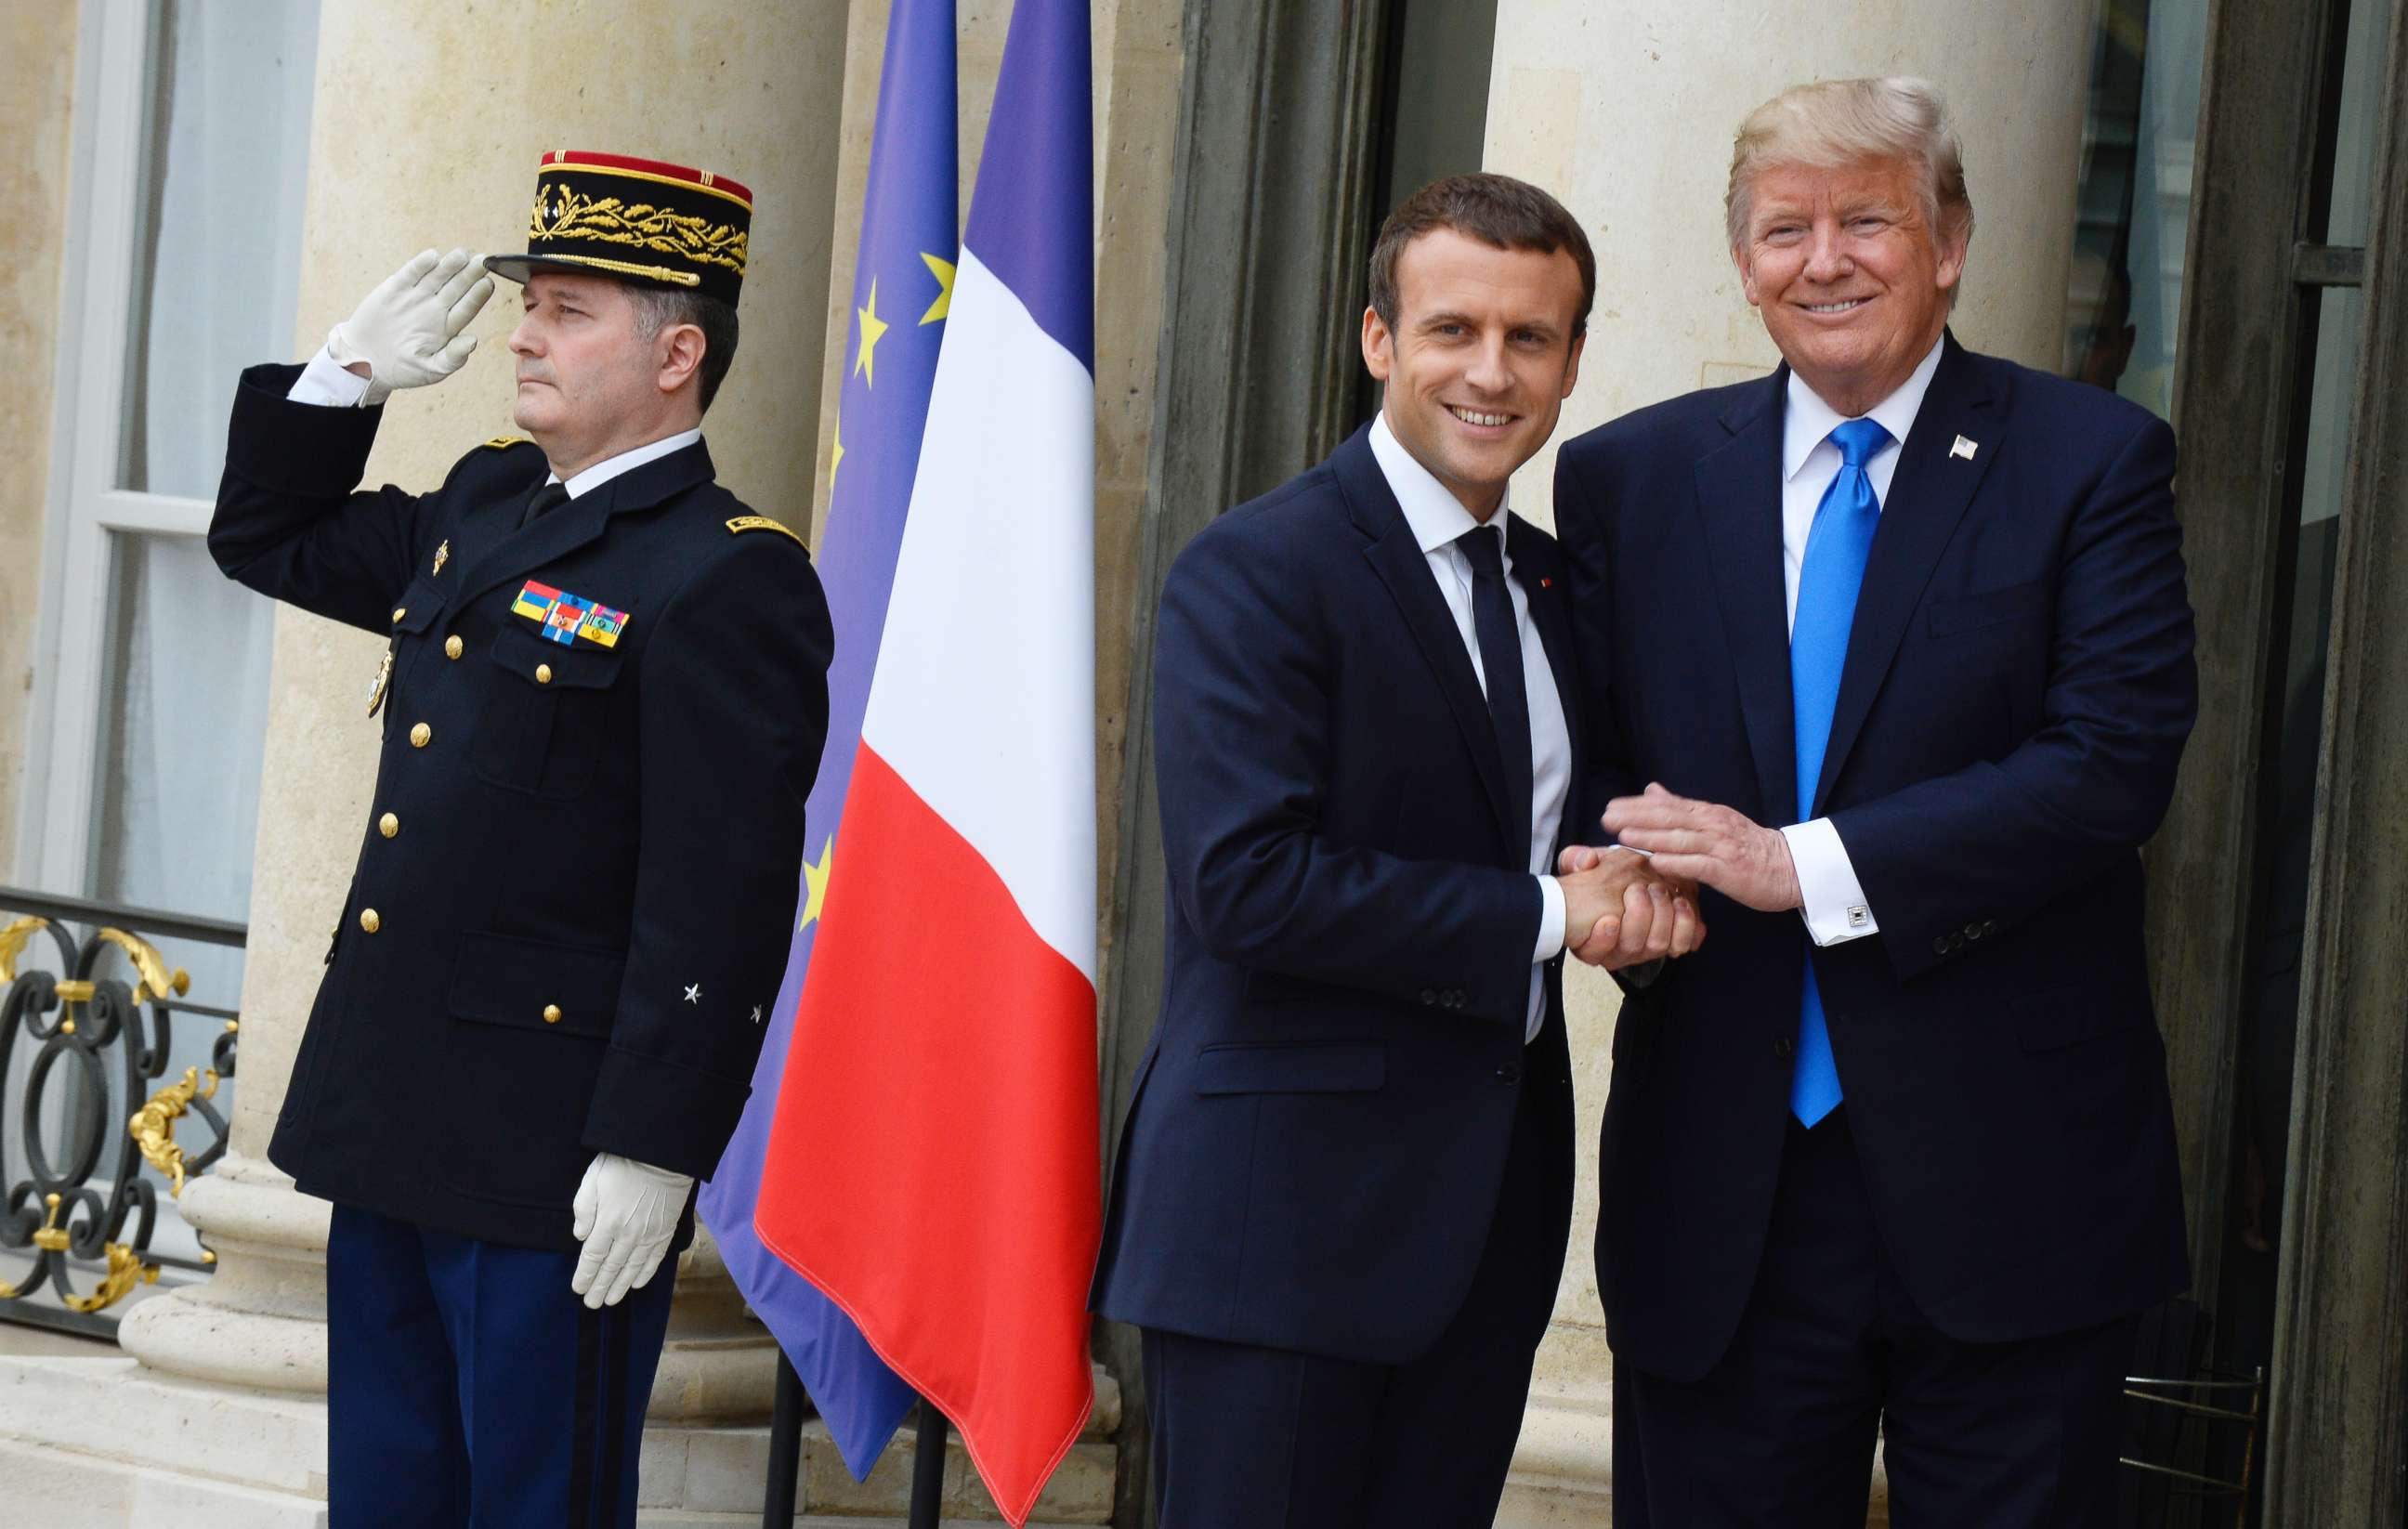 PHOTO: French President Emmanuel Macron receives President Donald Trump at the Elysee Palace, July 13, 2017, in Paris.